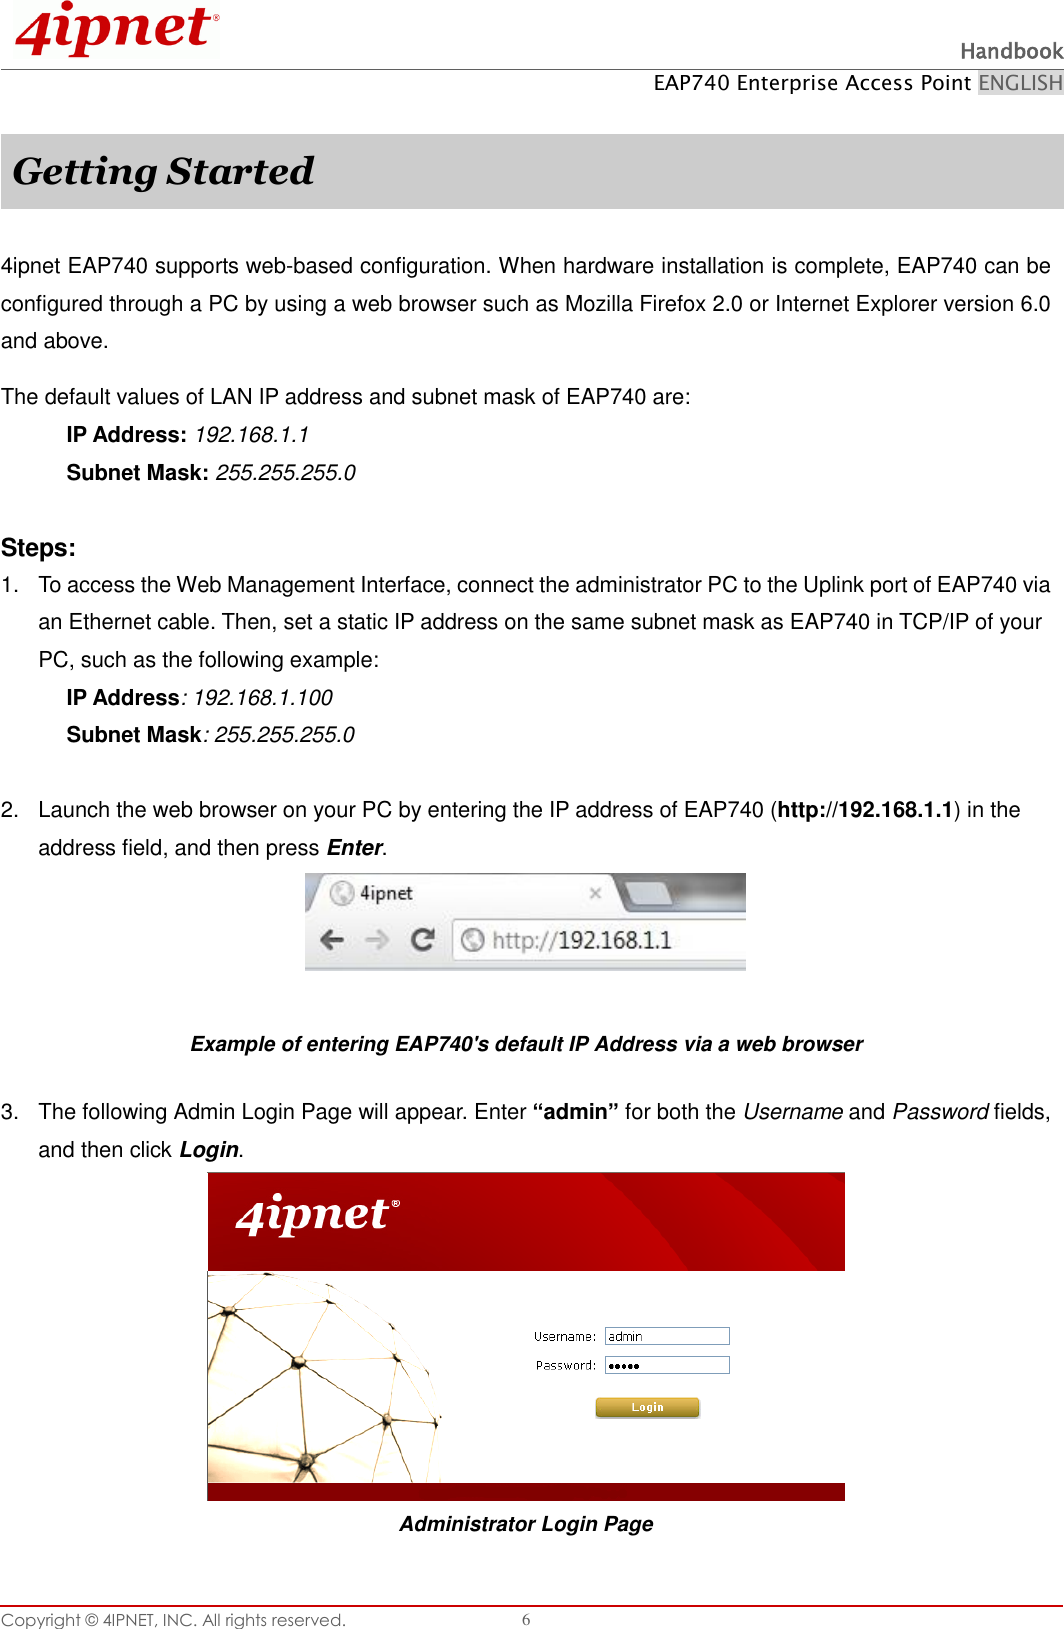 Page 11 of 4IPNET 180002 Enterprise Access Point User Manual QIG